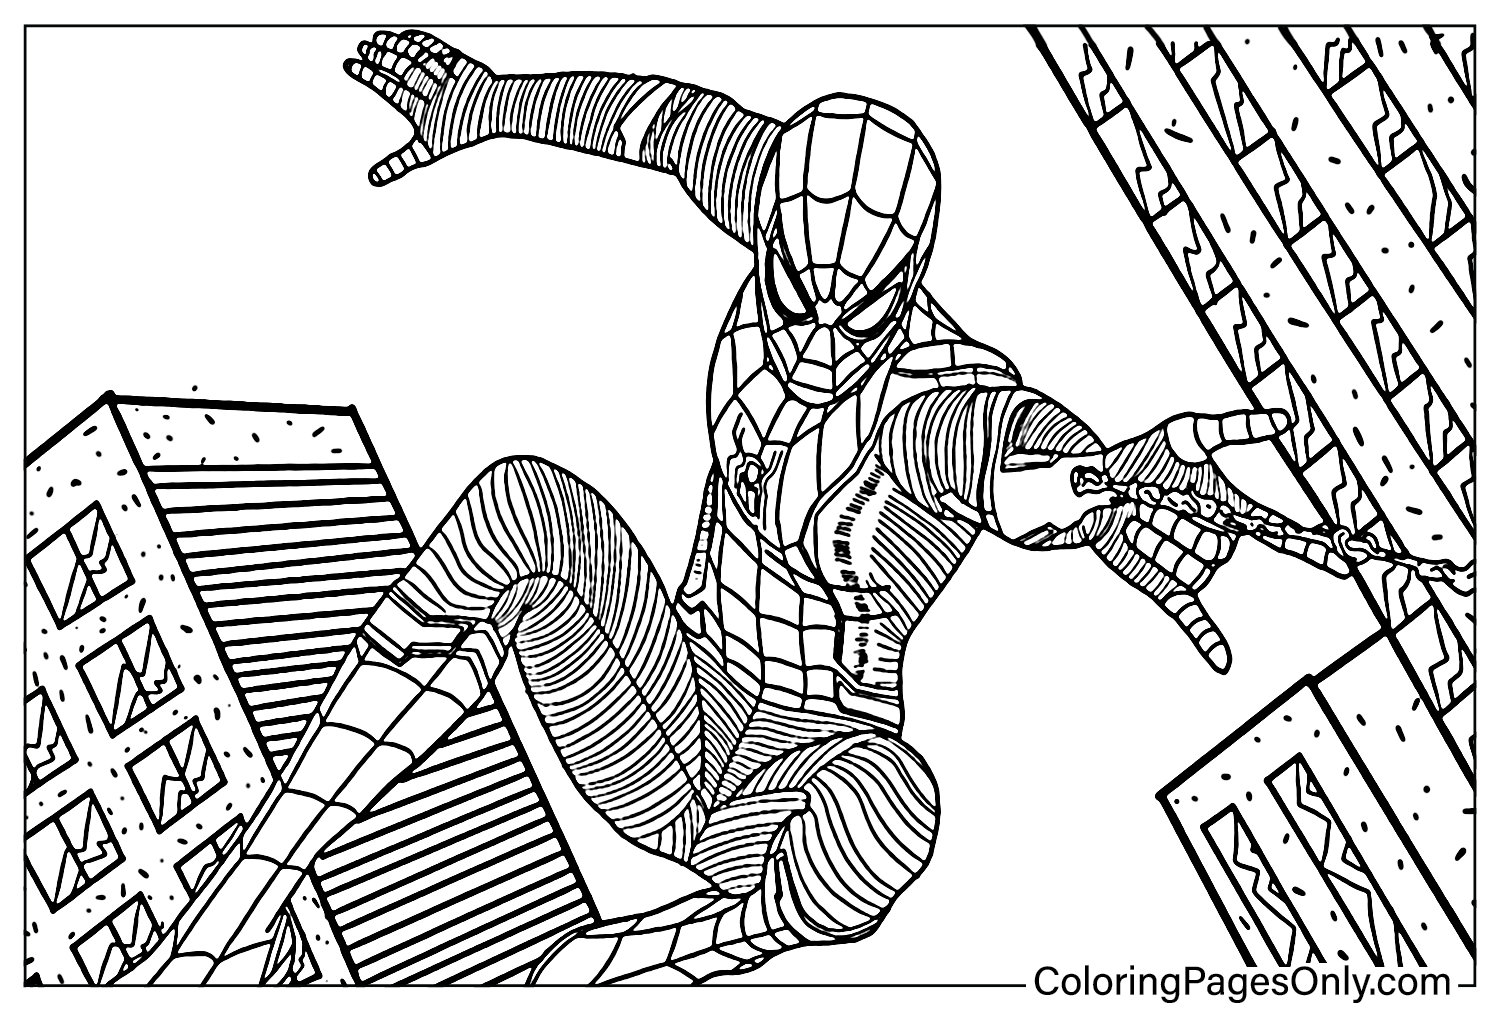 Coloring pages only on x spider